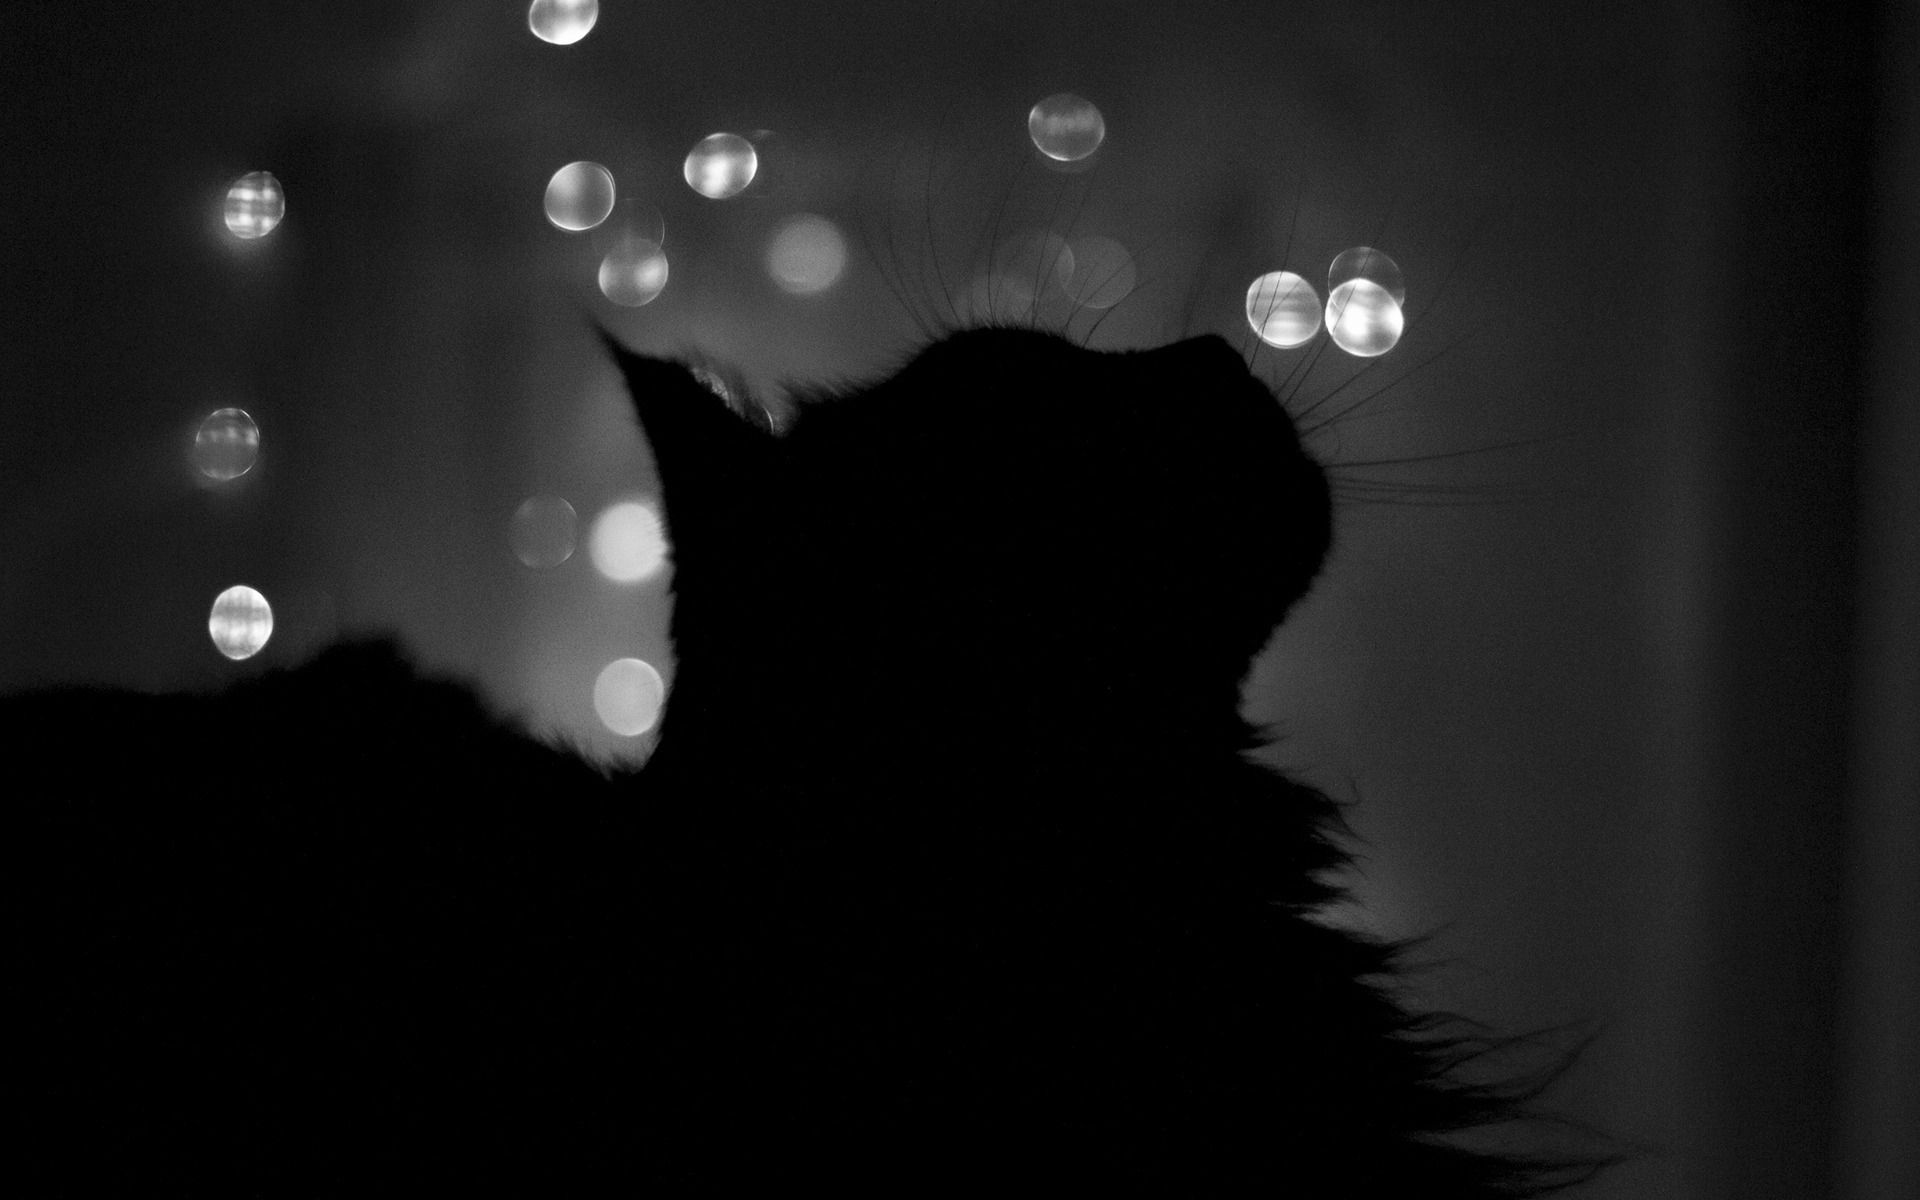 A cat is looking up at something in the dark - Cat